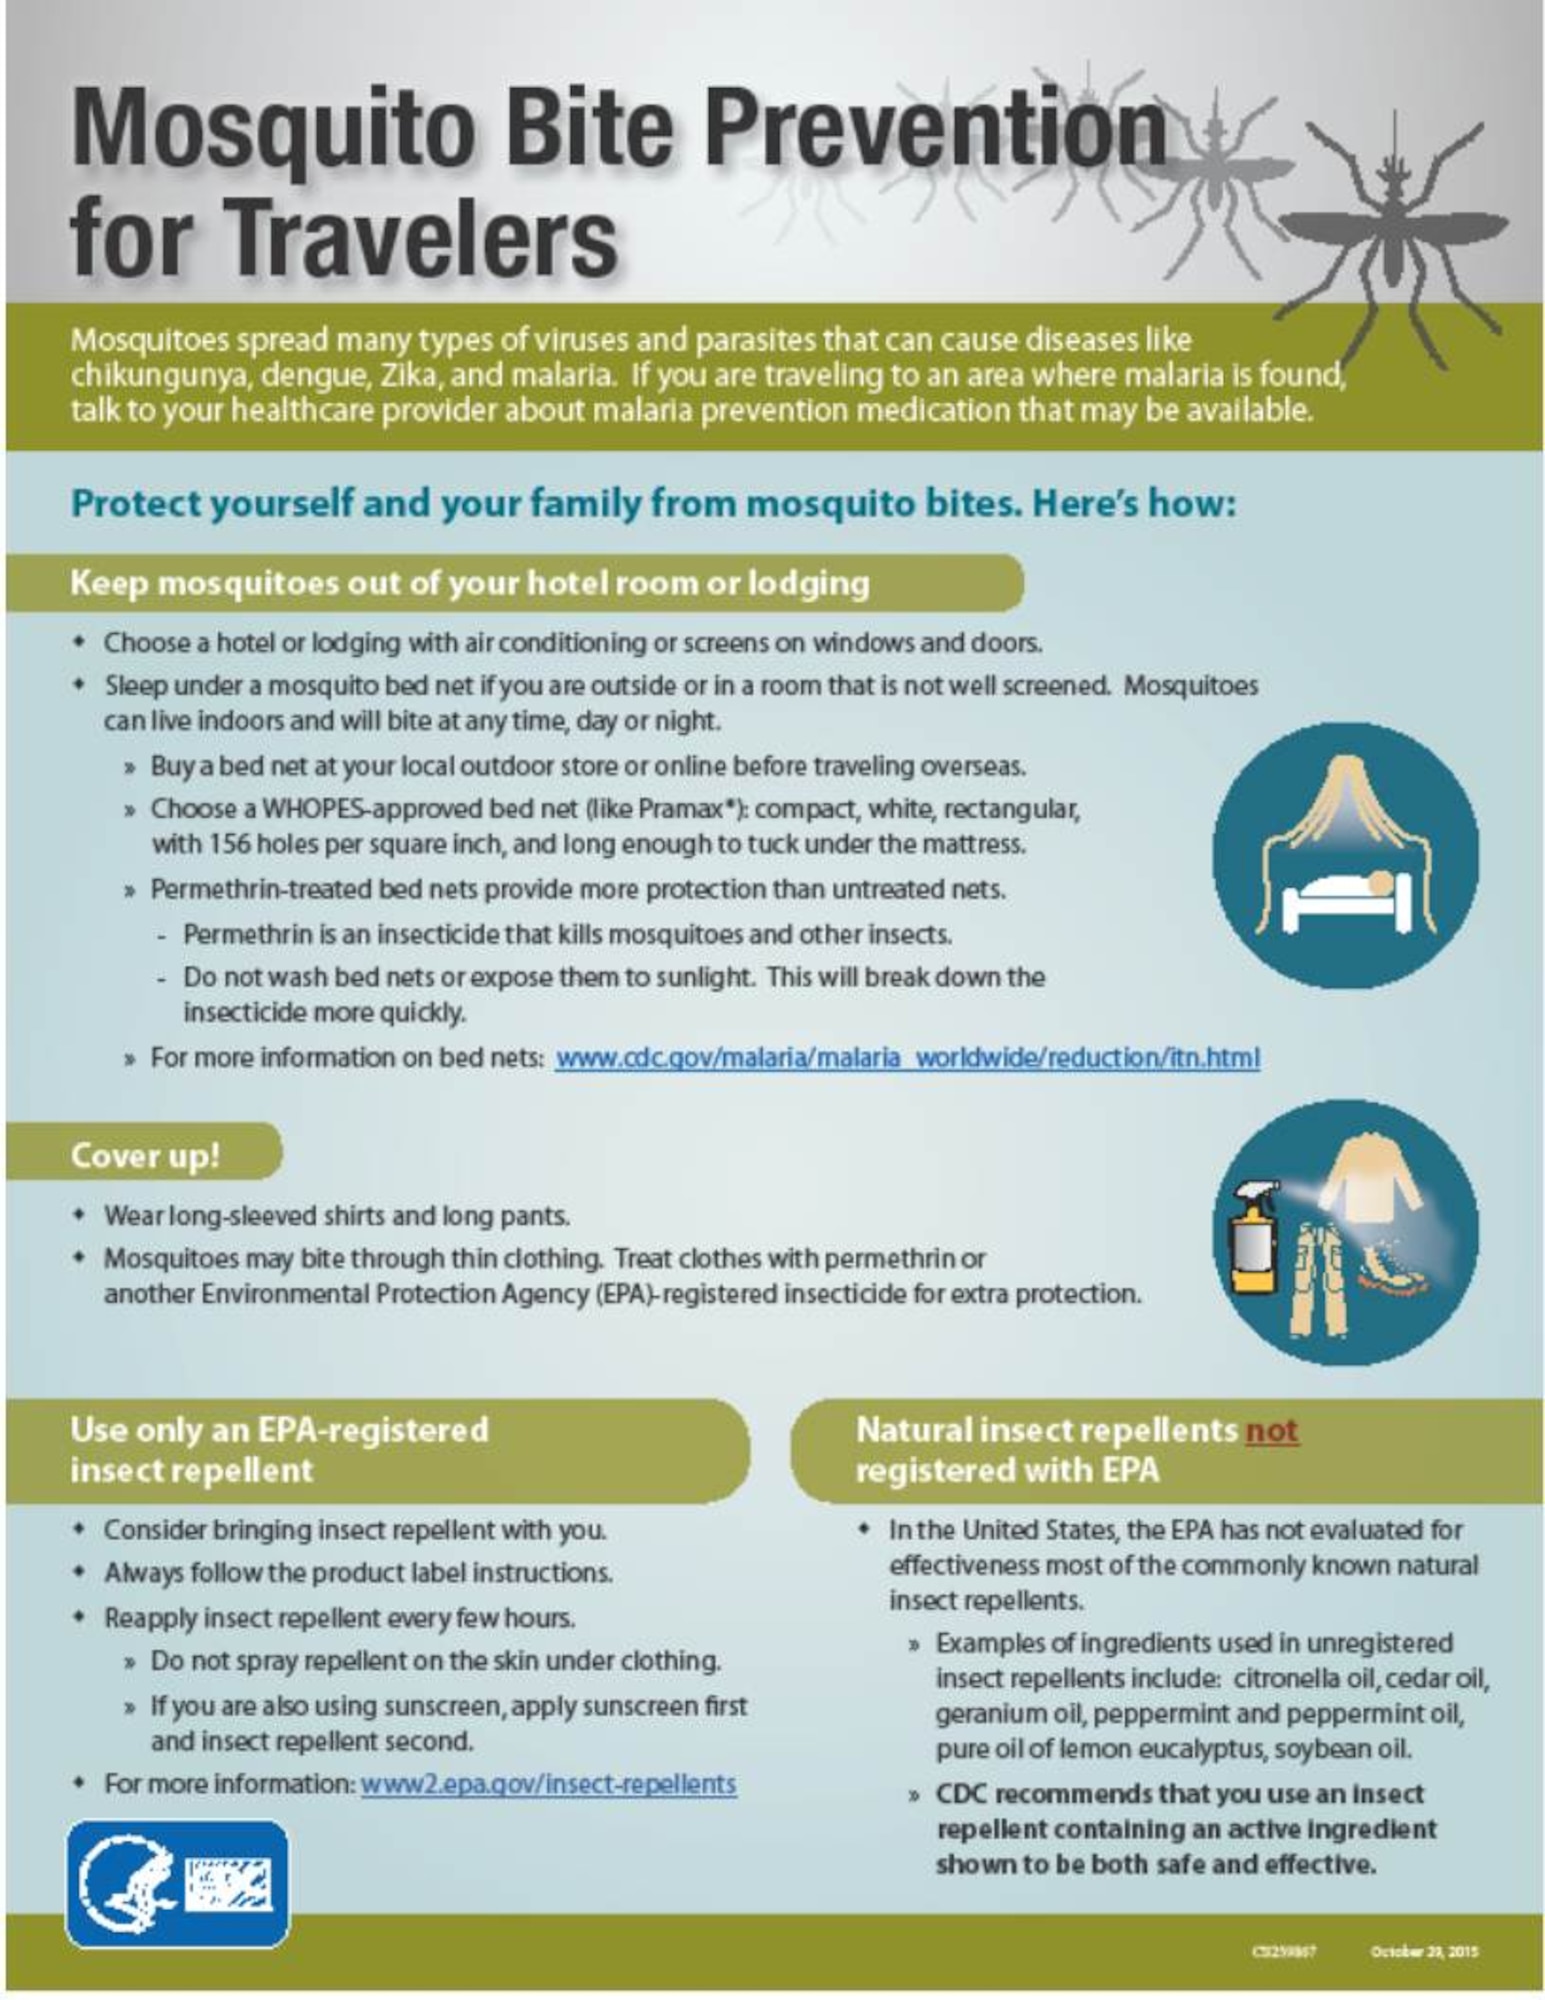 Mosquito prevention information graphic from the Centers for Disease Control and Prevention 